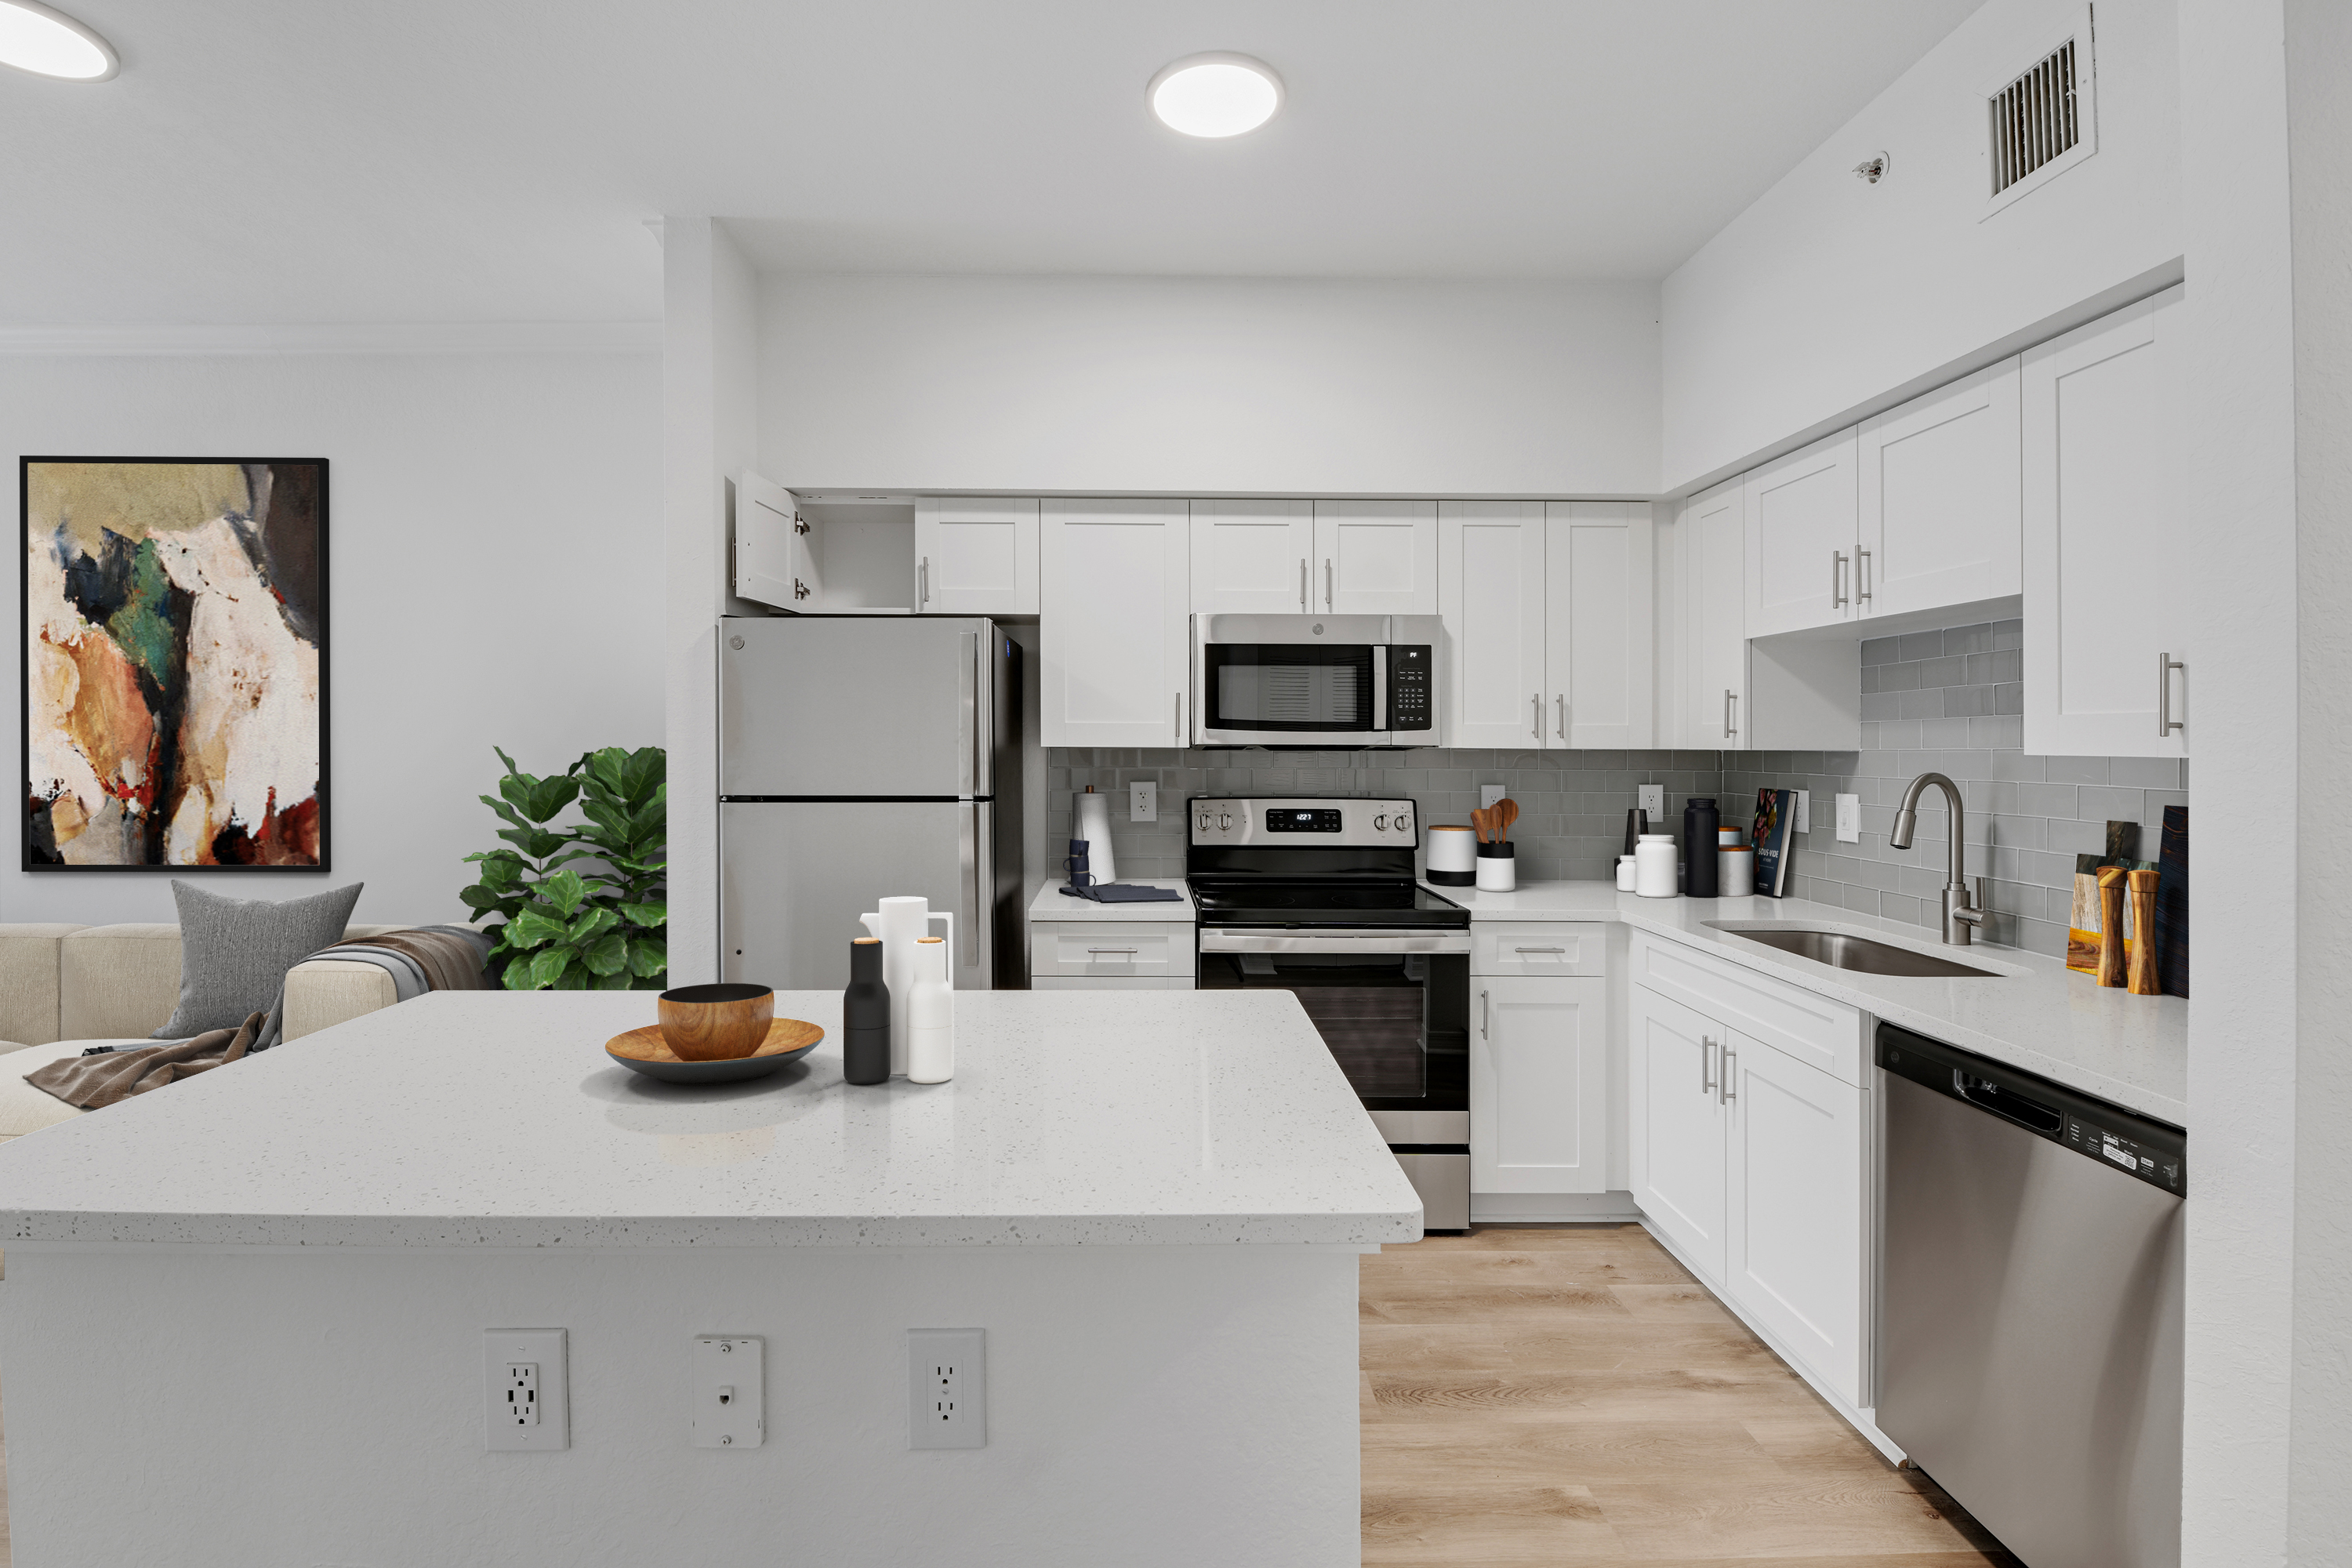 new kitchen renovation with white cabinetry and light quartz countertops